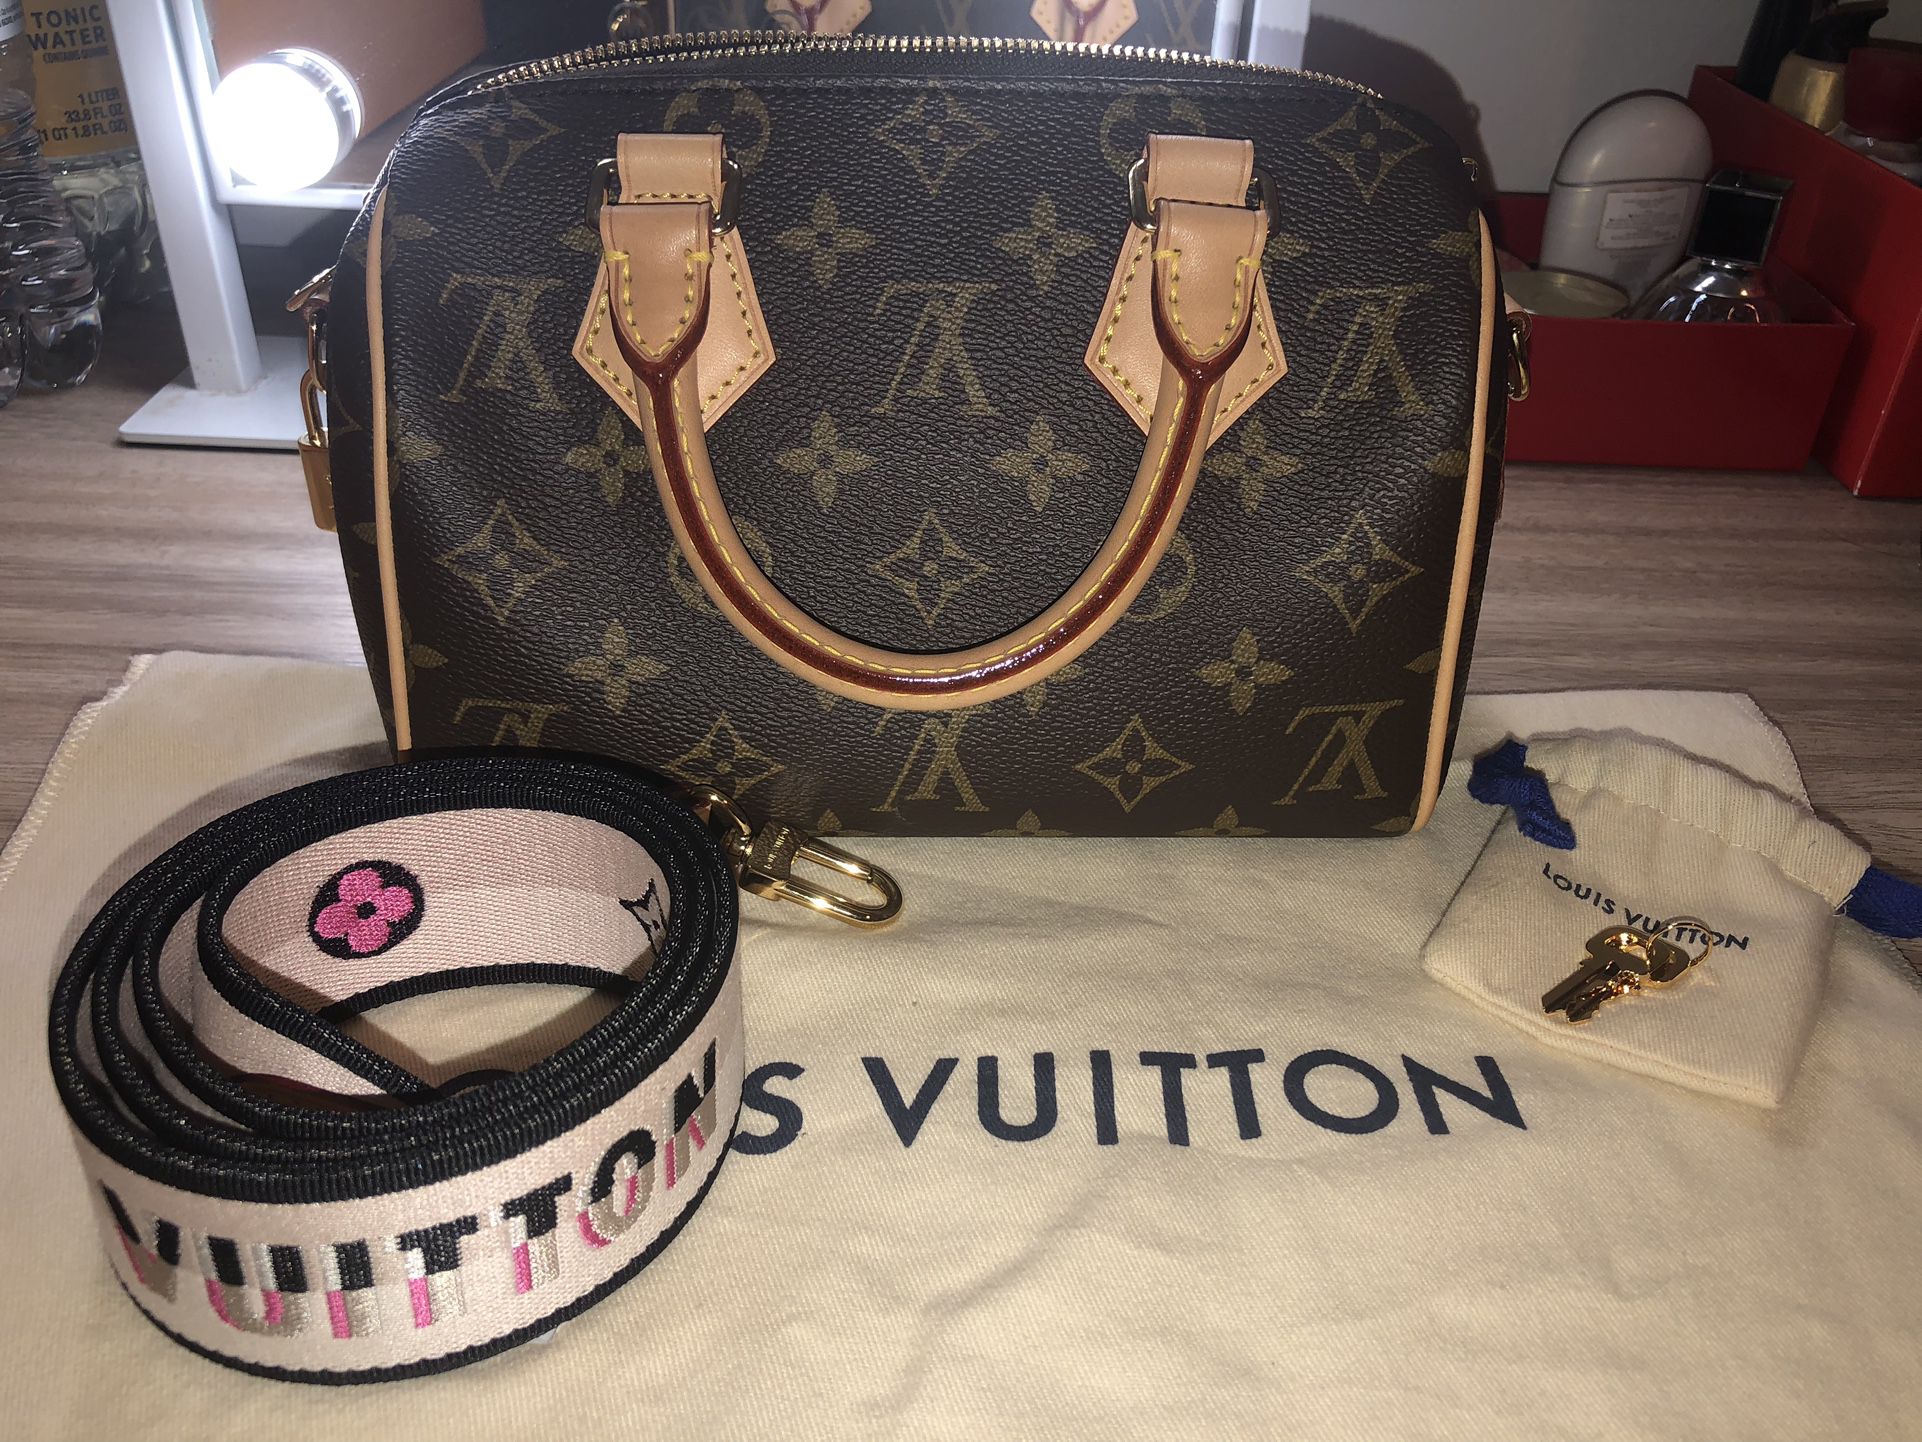 Selling my LV bag used but in new condition